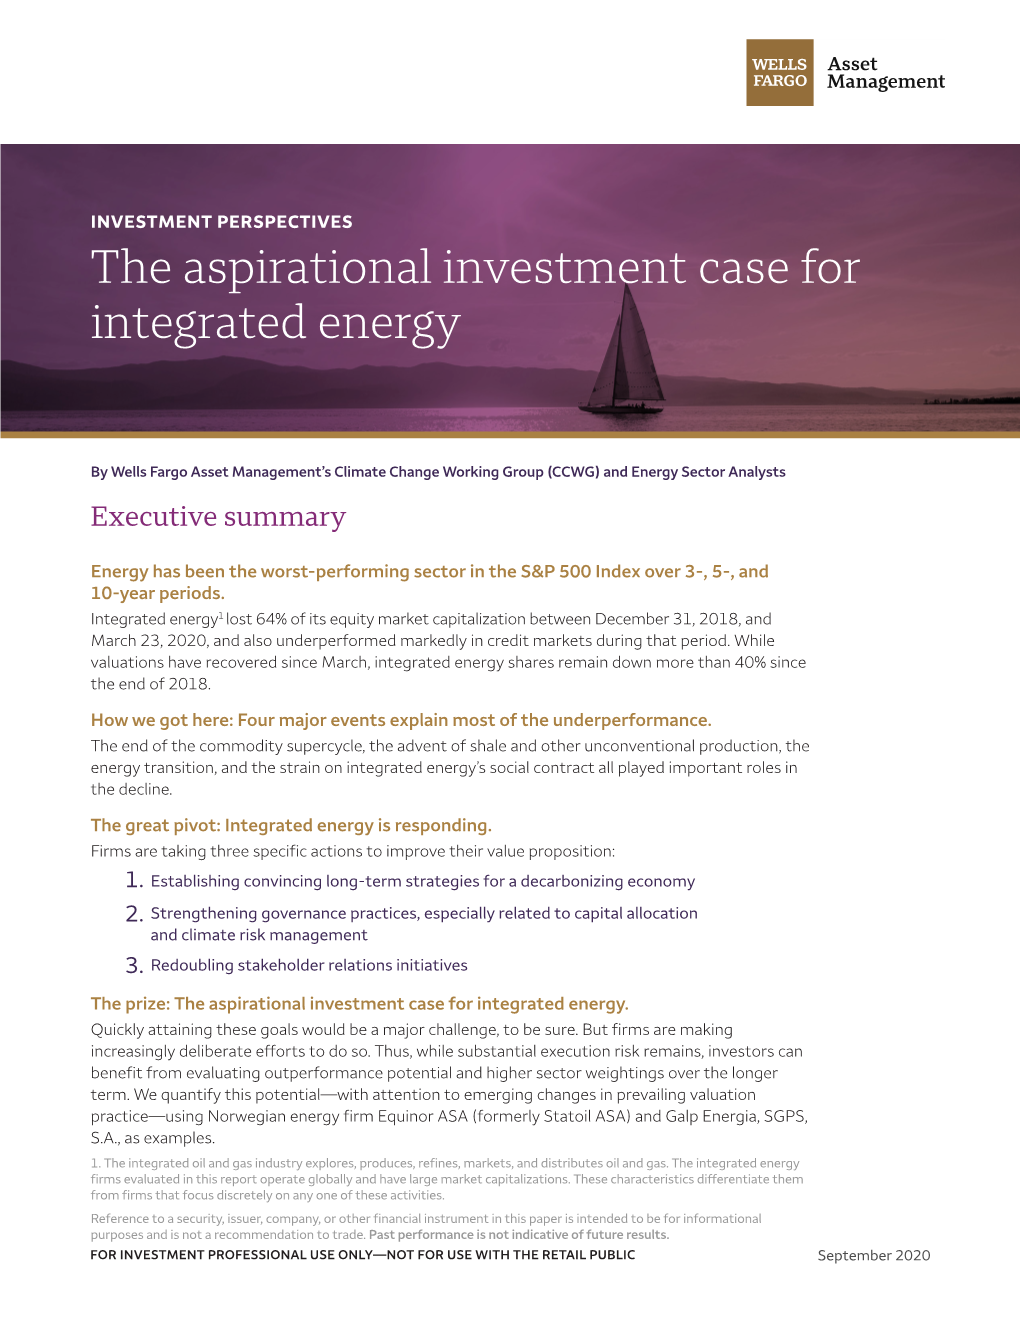 The Aspirational Investment Case for Integrated Energy (PDF)